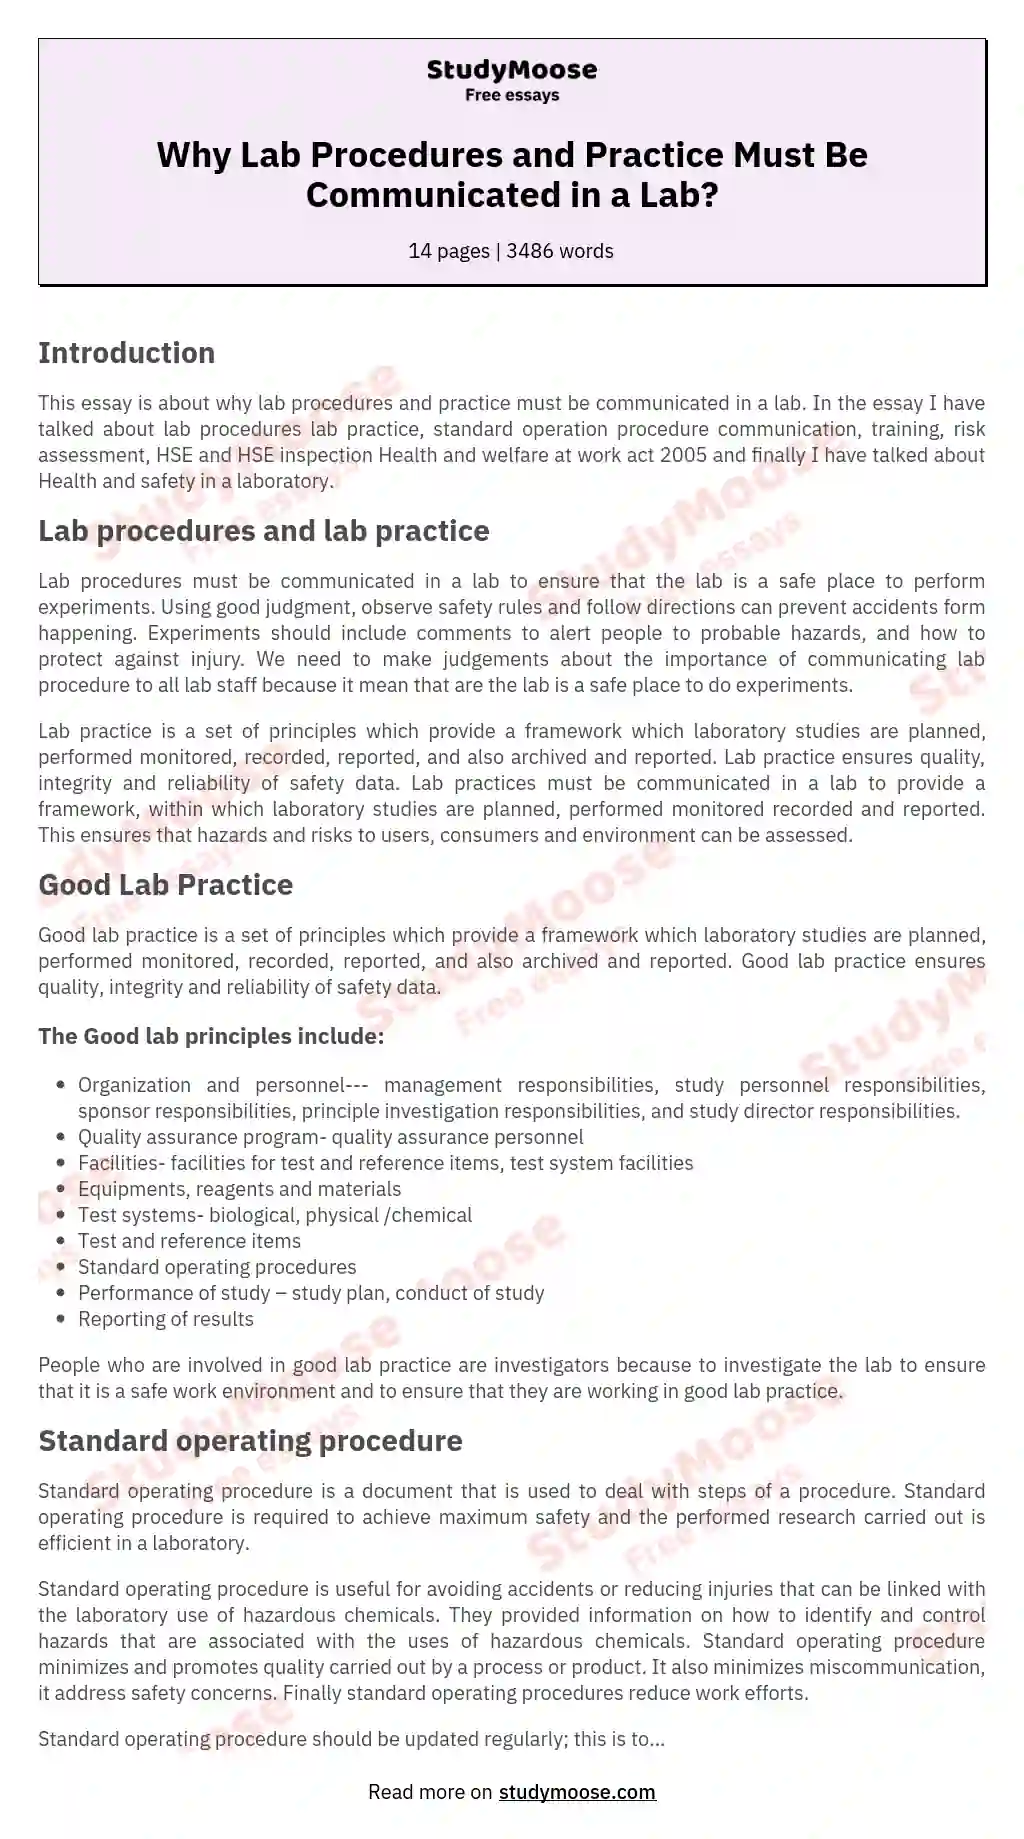 Why Lab Procedures and Practice Must Be Communicated in a Lab?